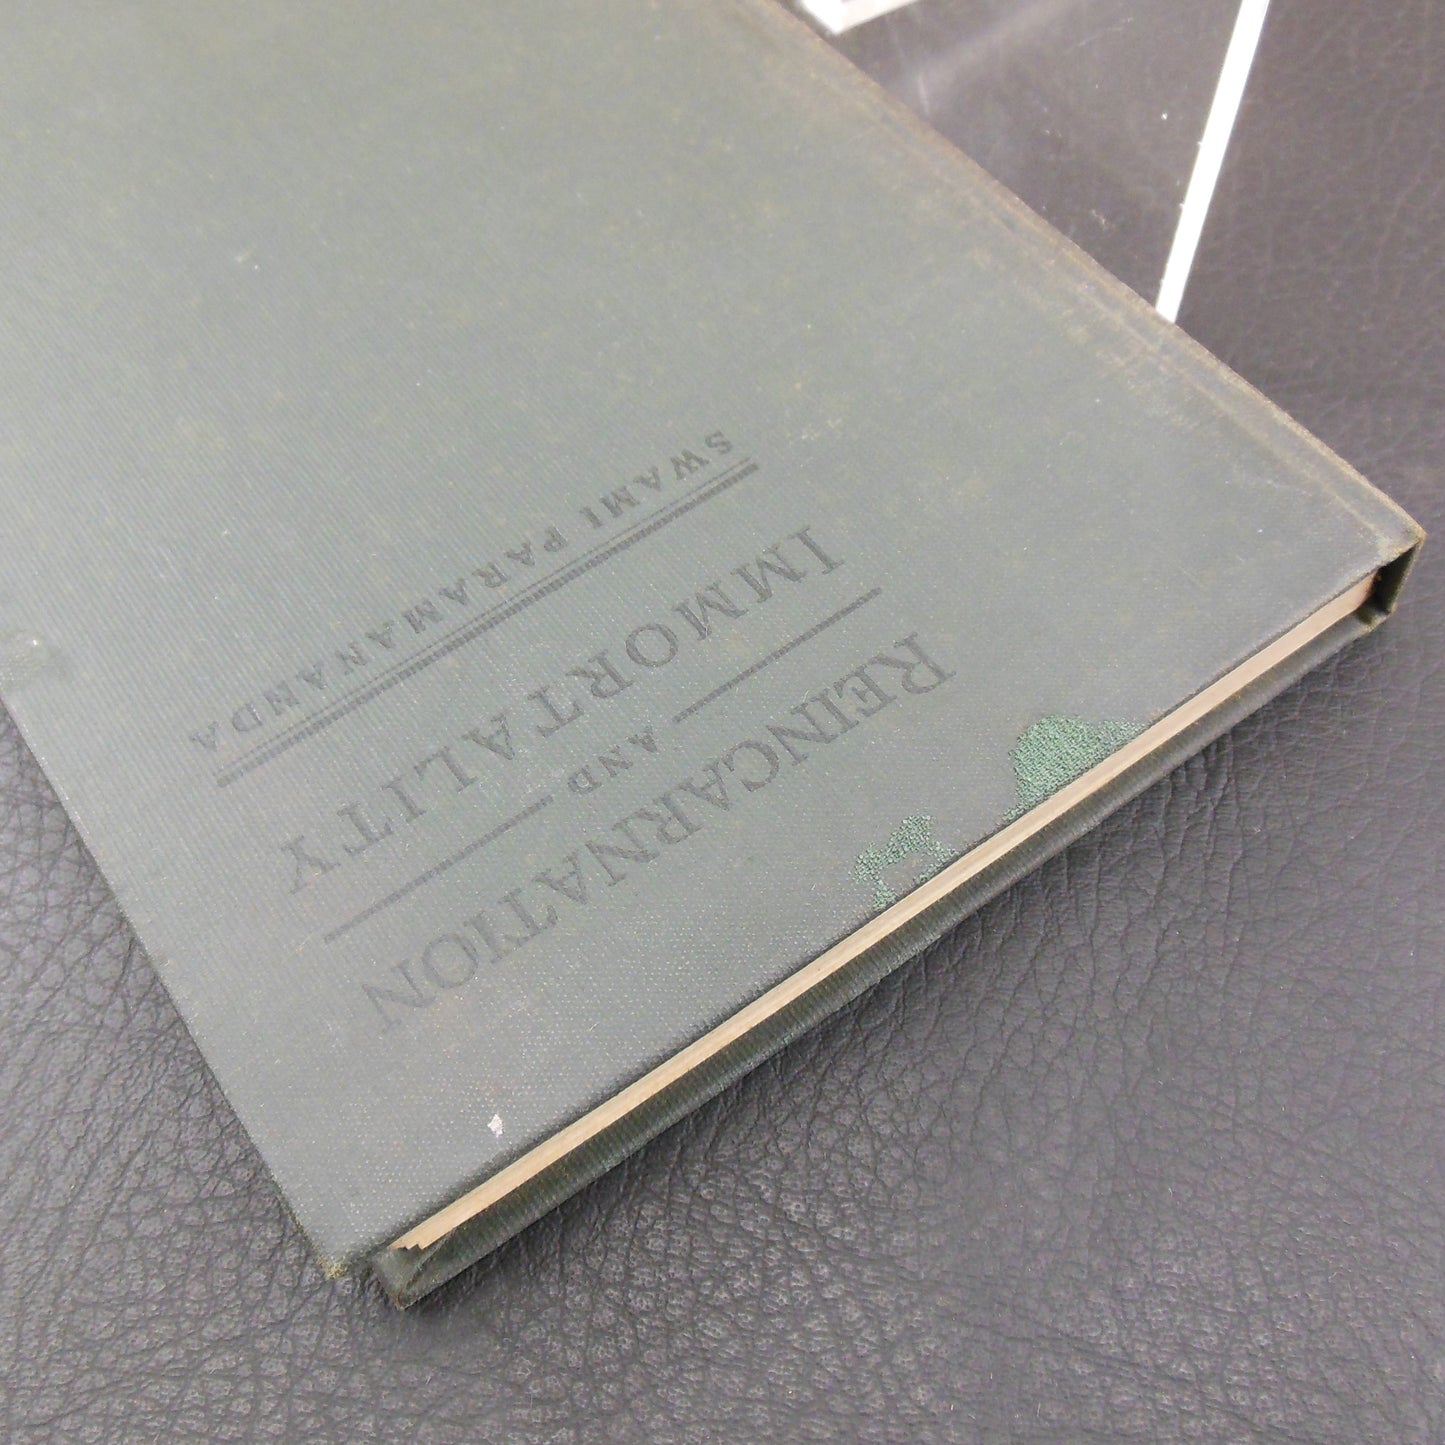 Swami Paramananda Book - Reincarnation and Immortality 1923 used